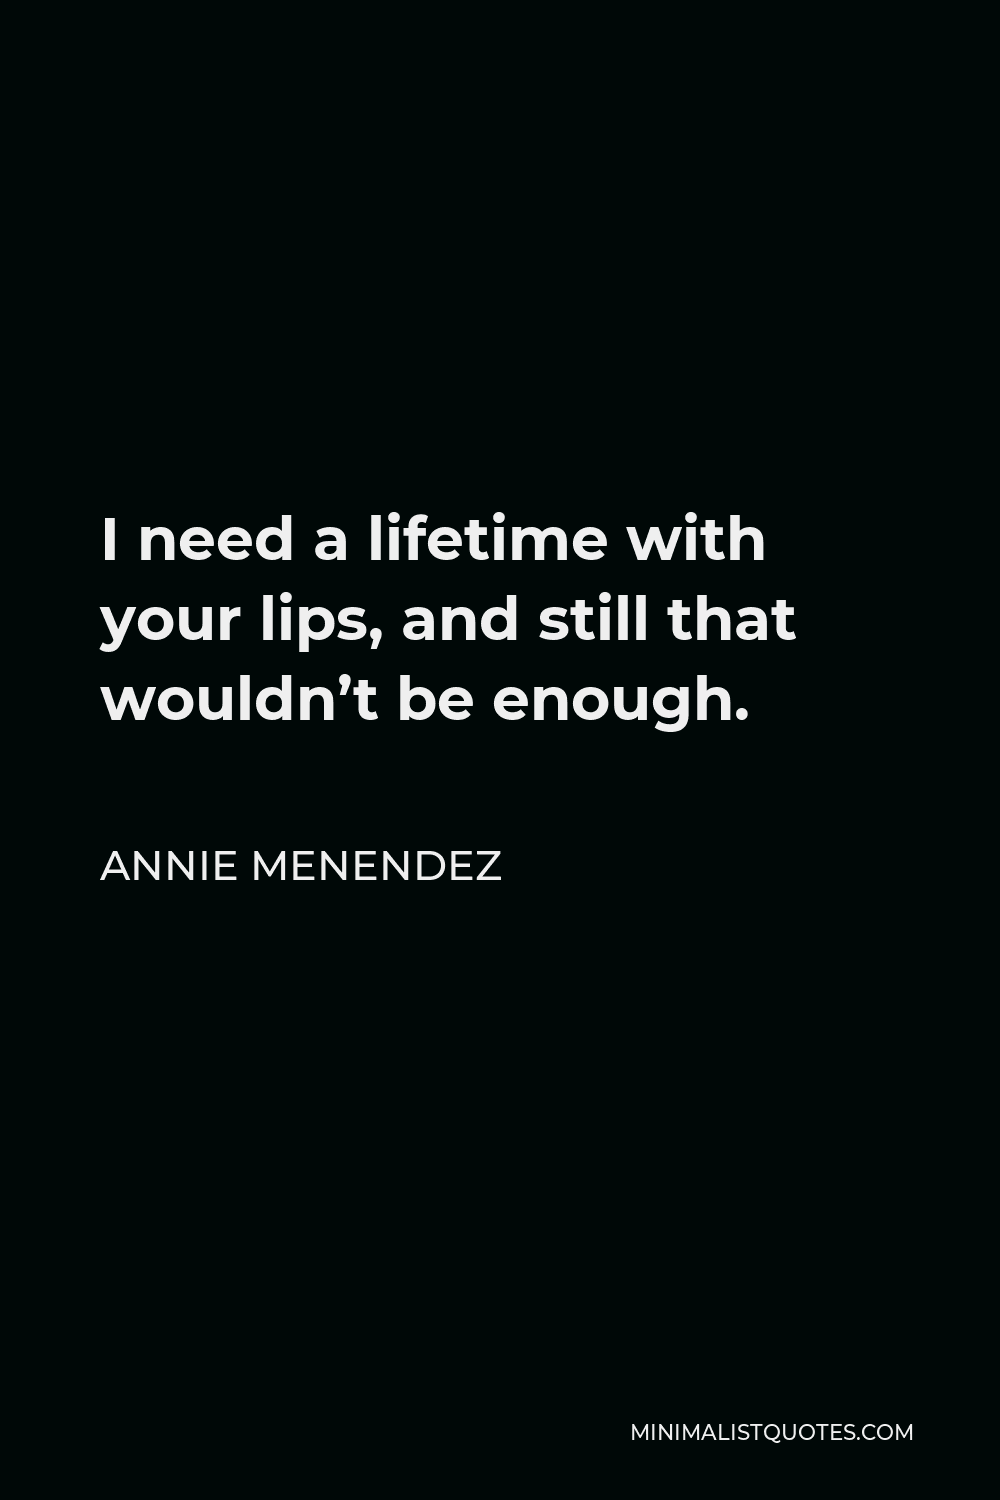 Annie Menendez Quote - I need a lifetime with your lips, and still that wouldn’t be enough.